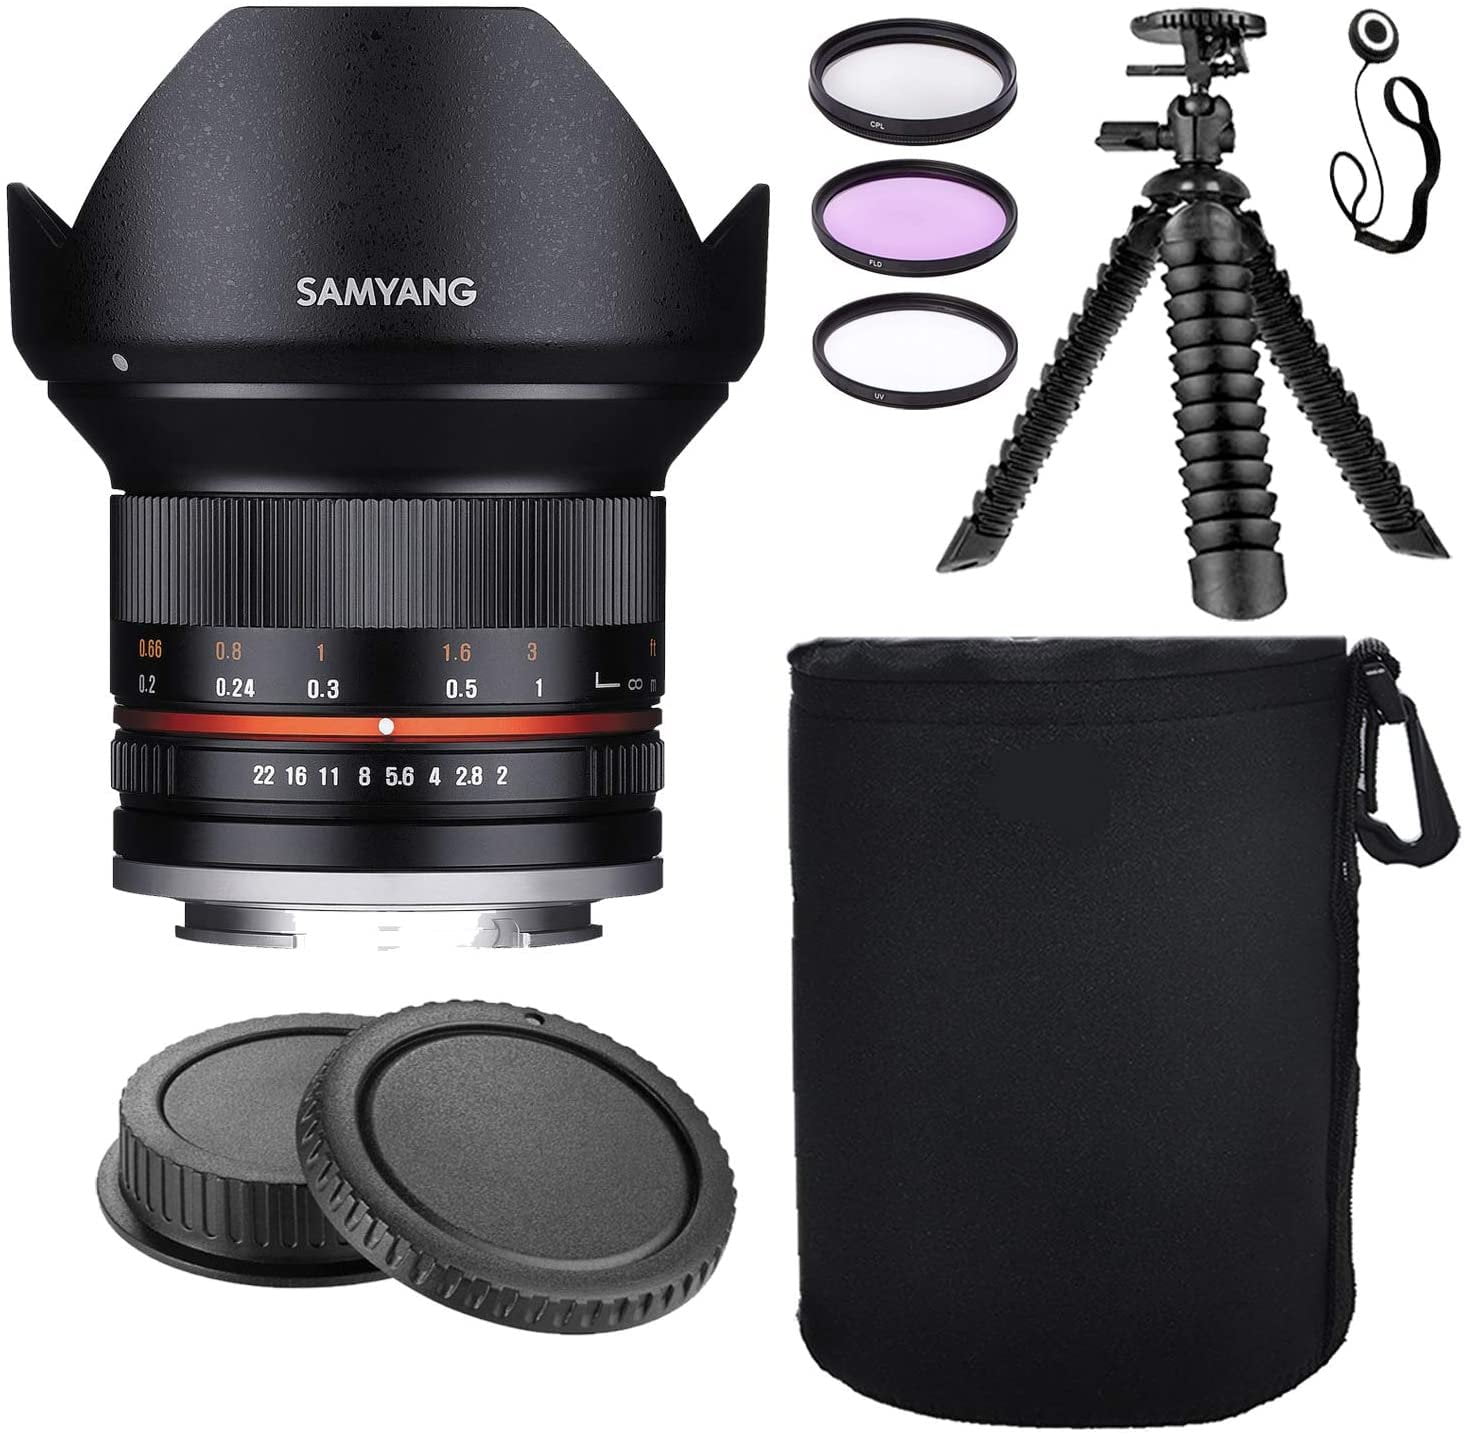 console mucus Blow Samyang SY12M-N 12mm F2.8 Full Frame Fisheye Lens for Nikon F Mount with AE  Chip w/Removable Lens Hood + Protective Lens Case, Spider Flex Tripod &  Other Accessory Bundle - Walmart.com